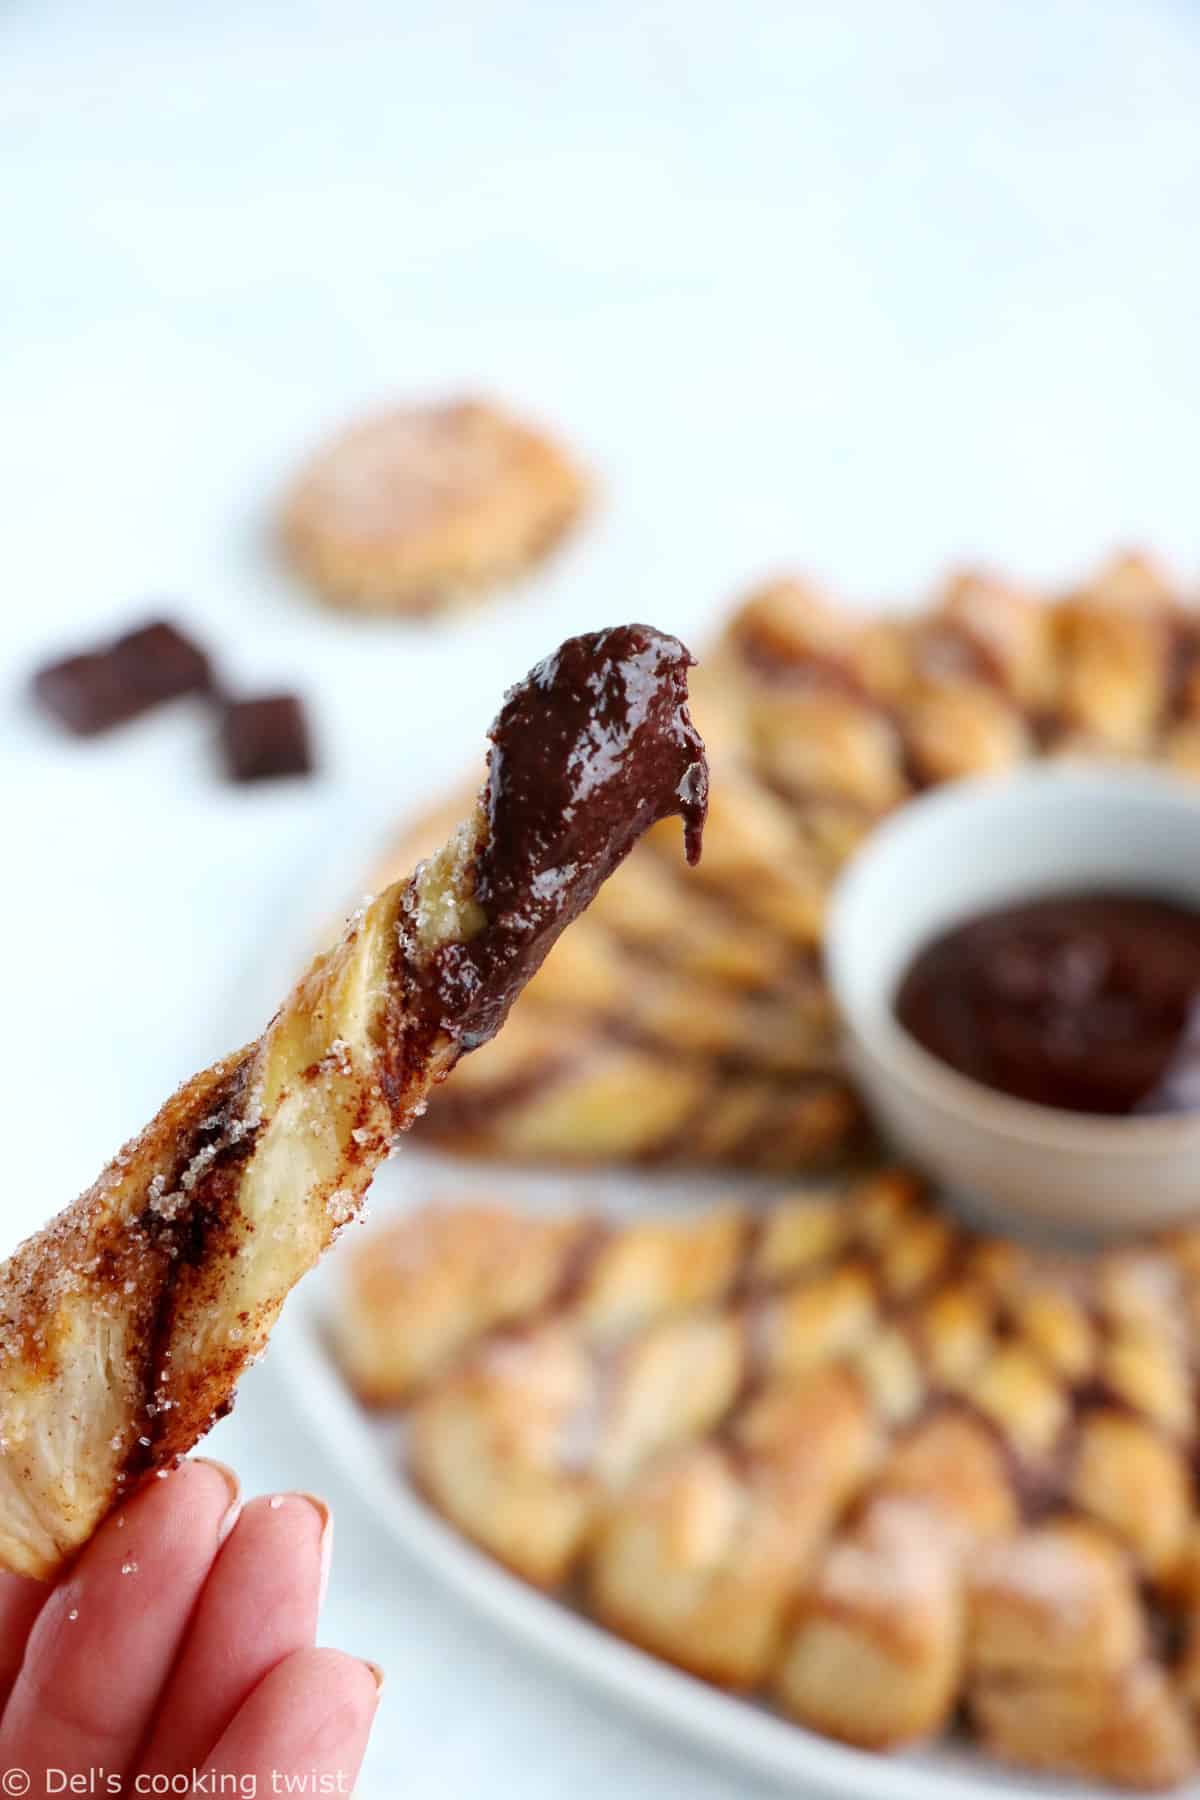 For a quick party dessert in a pinch, this churro-style cinnamon sugar tarte soleil with a chocolate dipping sauce is the answer.